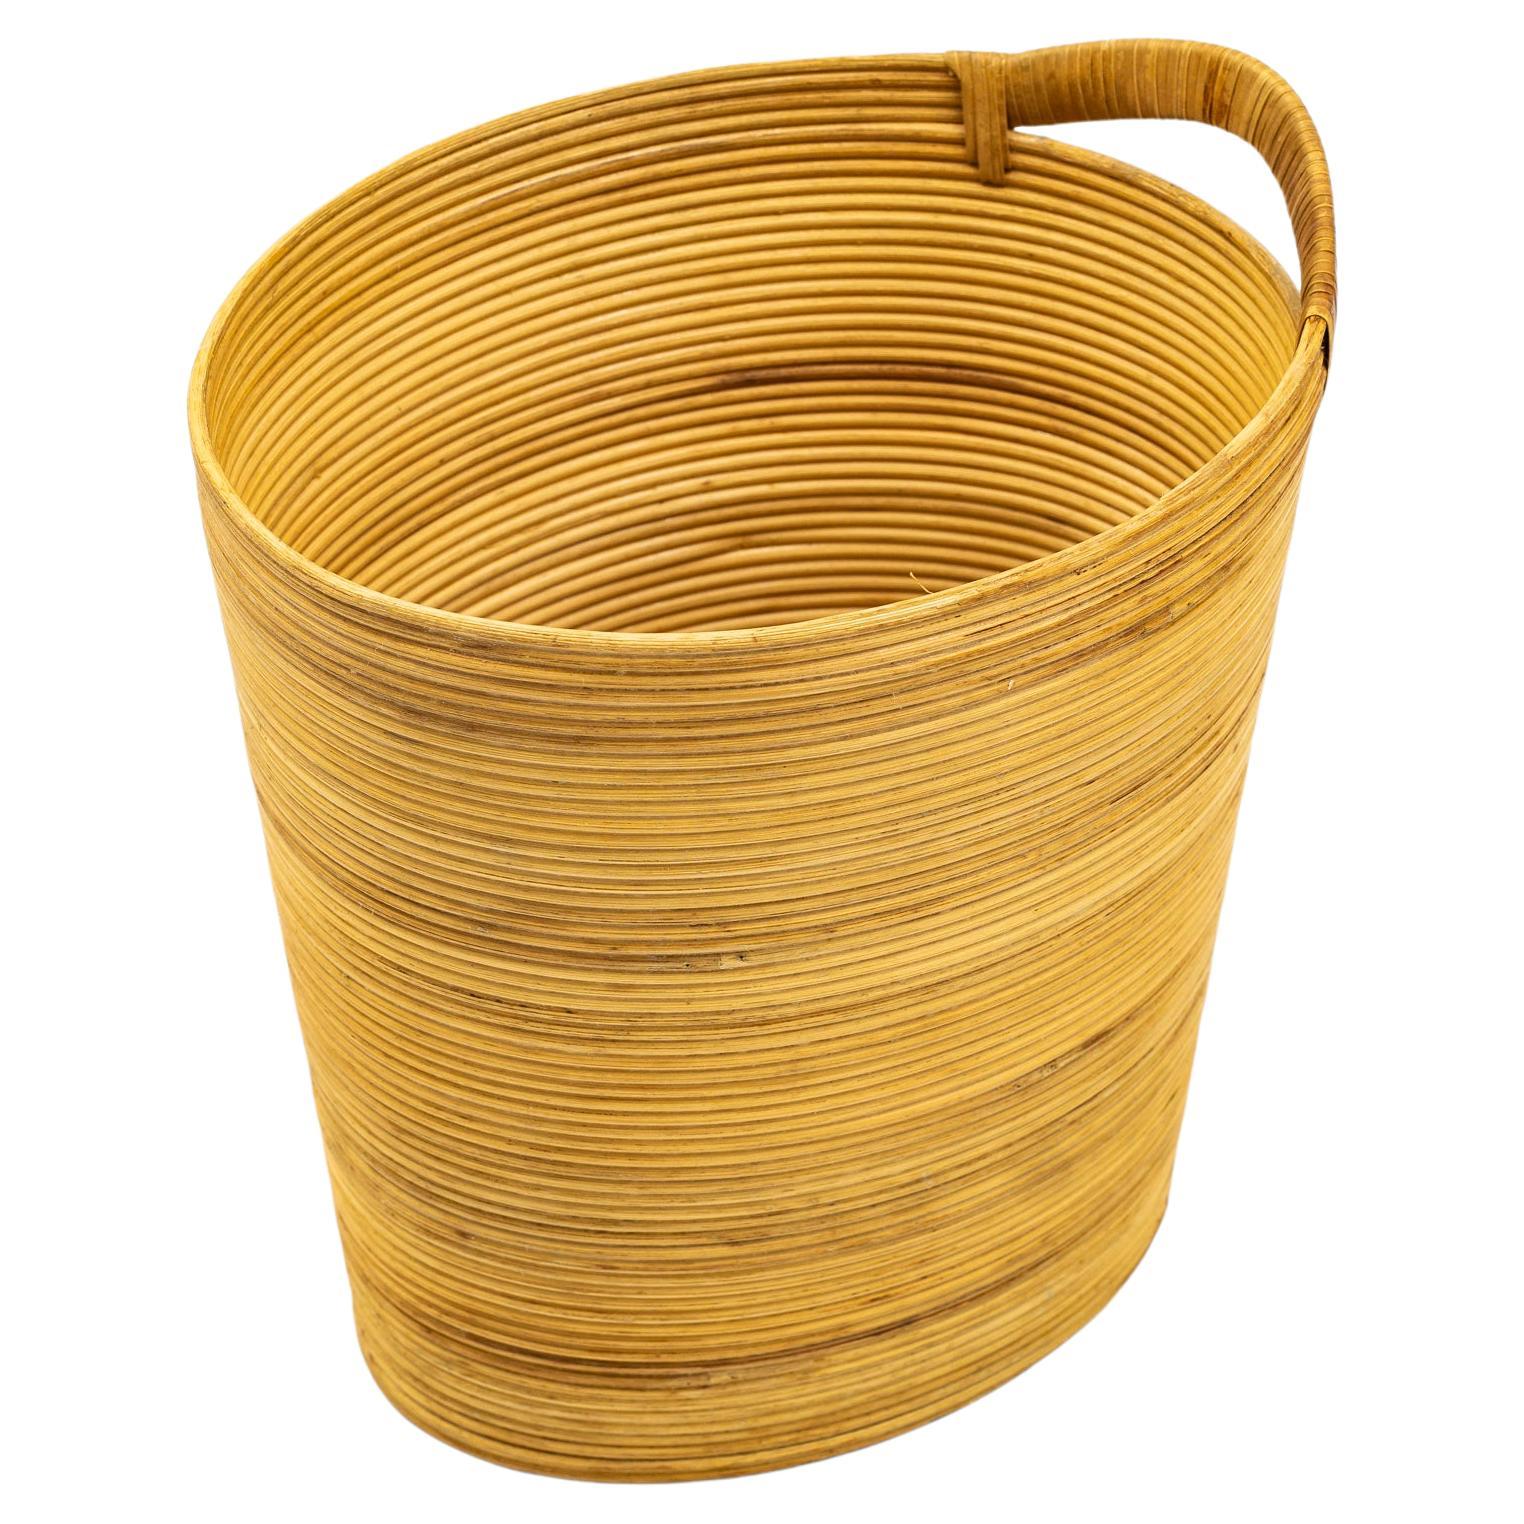 Papper Basket Designed and Manufactured by Laurids Lønborg in Denmark, 1950s